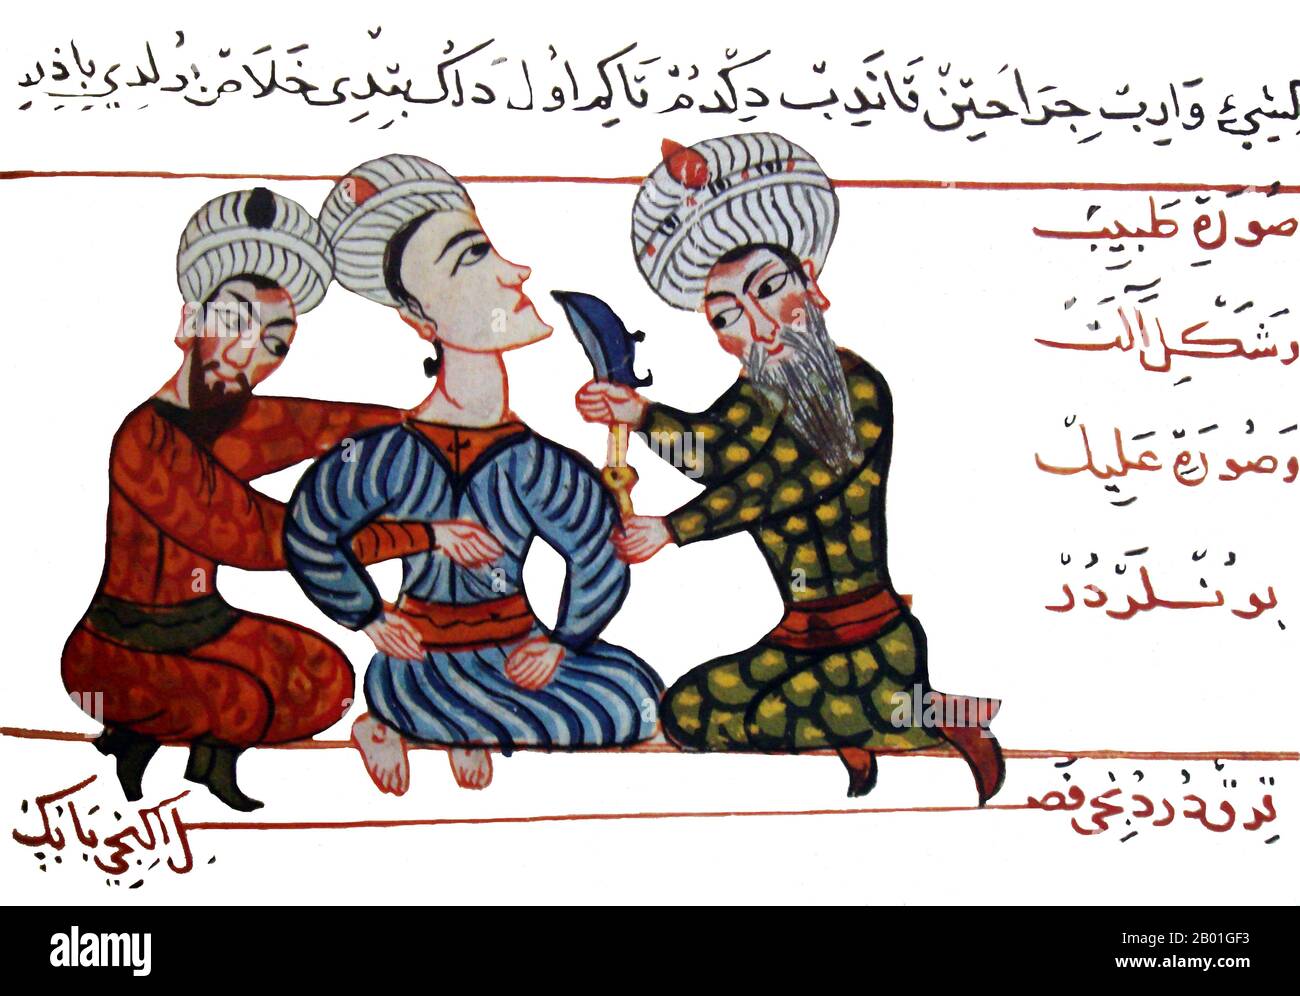 Spain/Al-Andalus: Chirurgical operation. Illustration from a Surgical Treatise of Sharaf al-Din, 1465.  Al-Andalus was the Arabic name given to a nation and territorial region also commonly referred to as Moorish Iberia. The name describes parts of the Iberian Peninsula and Septimania governed by Muslims (often given the generic name of Moors), at various times in the period between 711 and 1492, although the territorial boundaries underwent constant changes due to wars with the Christian Kingdoms. Following the Muslim conquest of Hispania, Al-Andalus was divided into five administrative areas Stock Photo